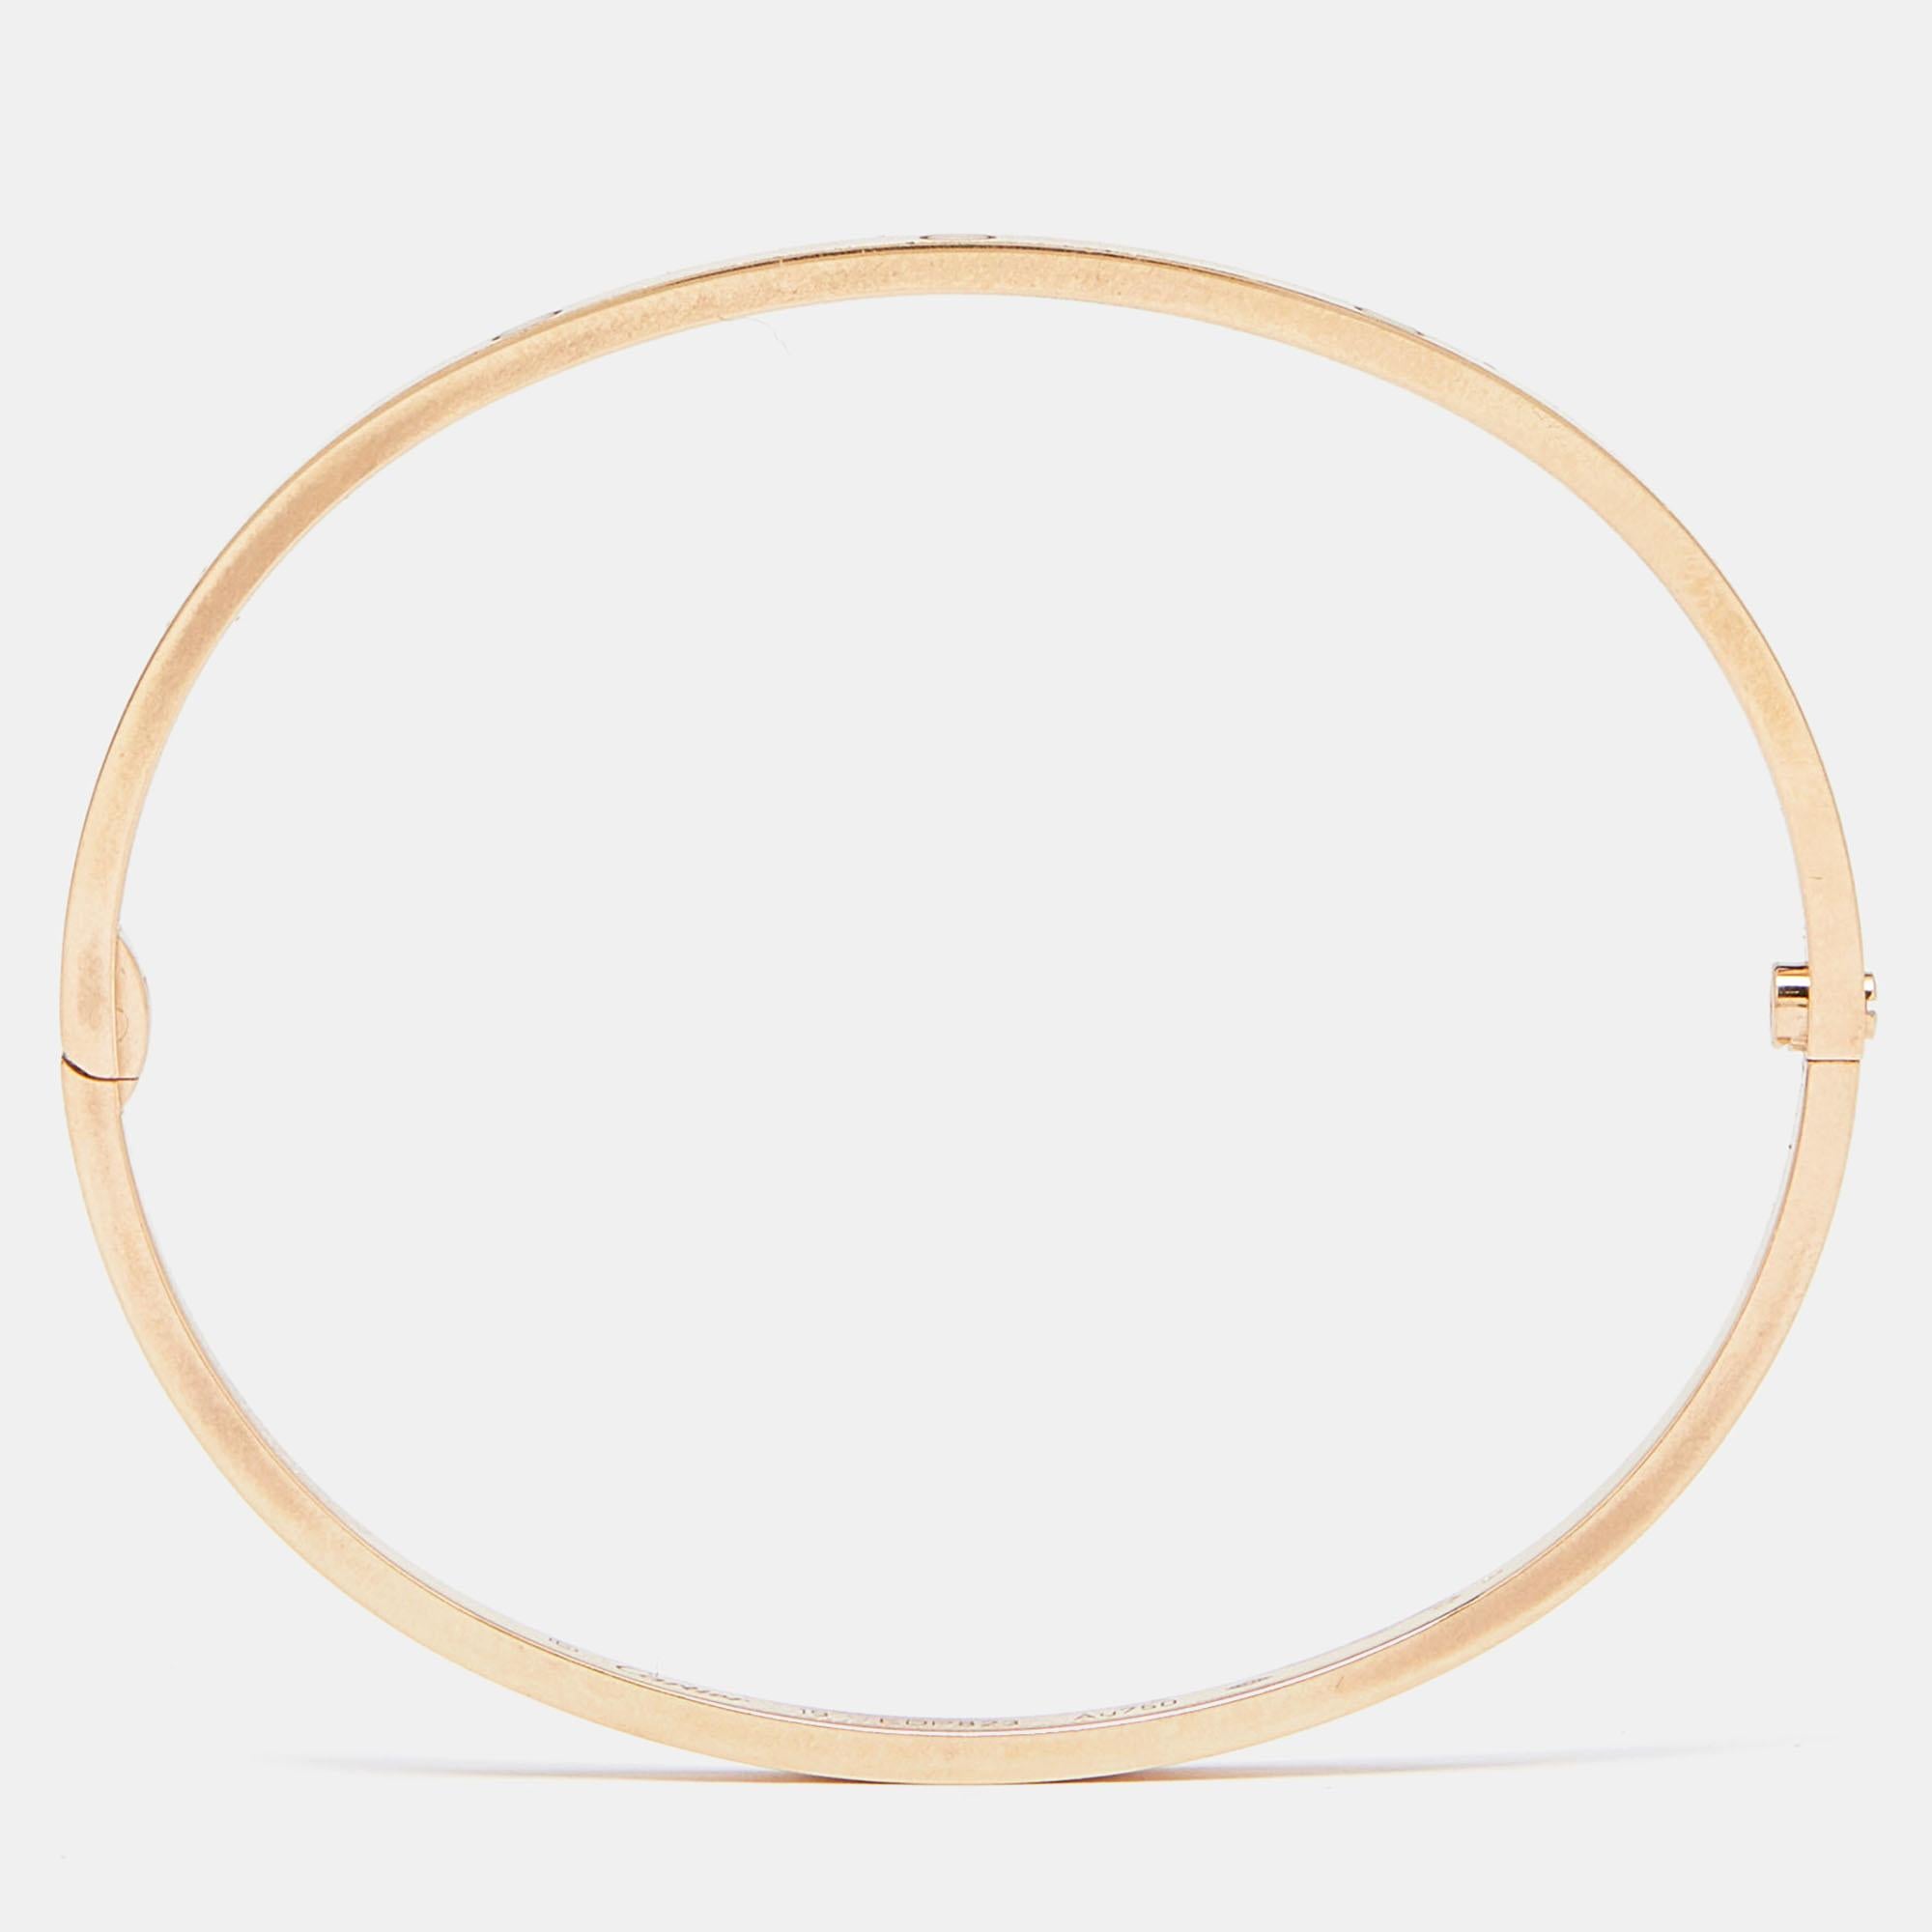 The Cartier Love bracelet is an exquisite masterpiece, seamlessly blending luxury and romance. Crafted in lustrous 18k rose gold, its iconic Love motif adds a touch of brilliance. The elegant design symbolizes eternal love and commitment, making it